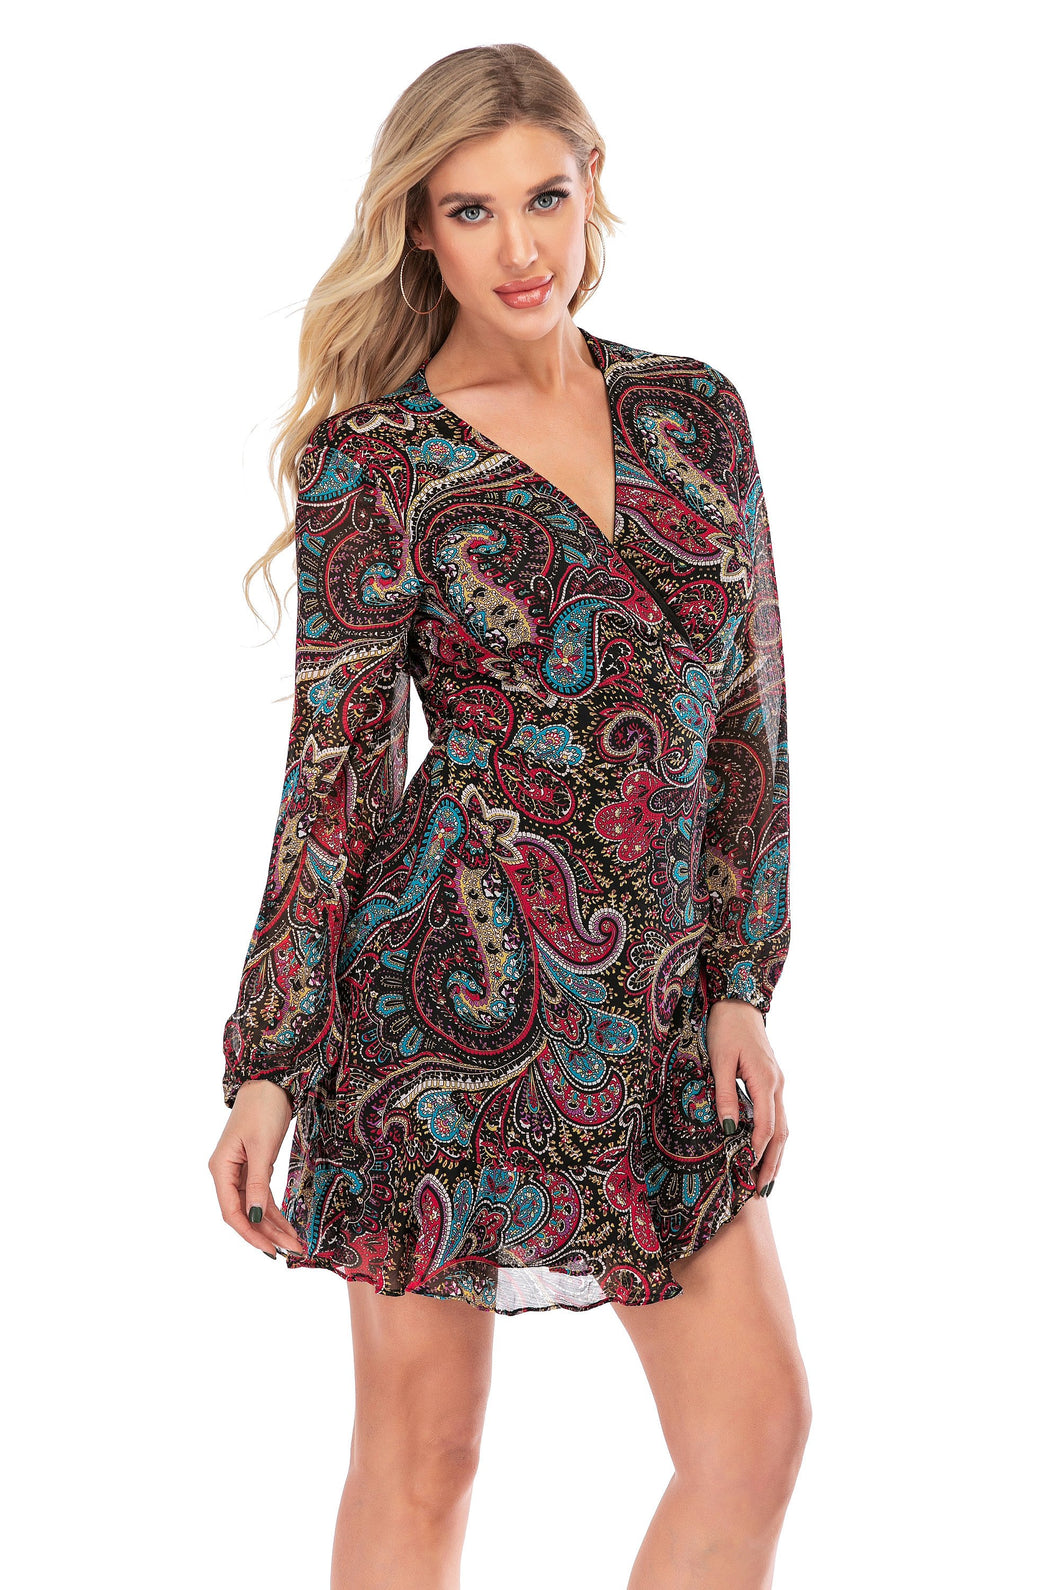 Women's Long Sleeve V-Neck Fashion Dress - foxberryparkproducts